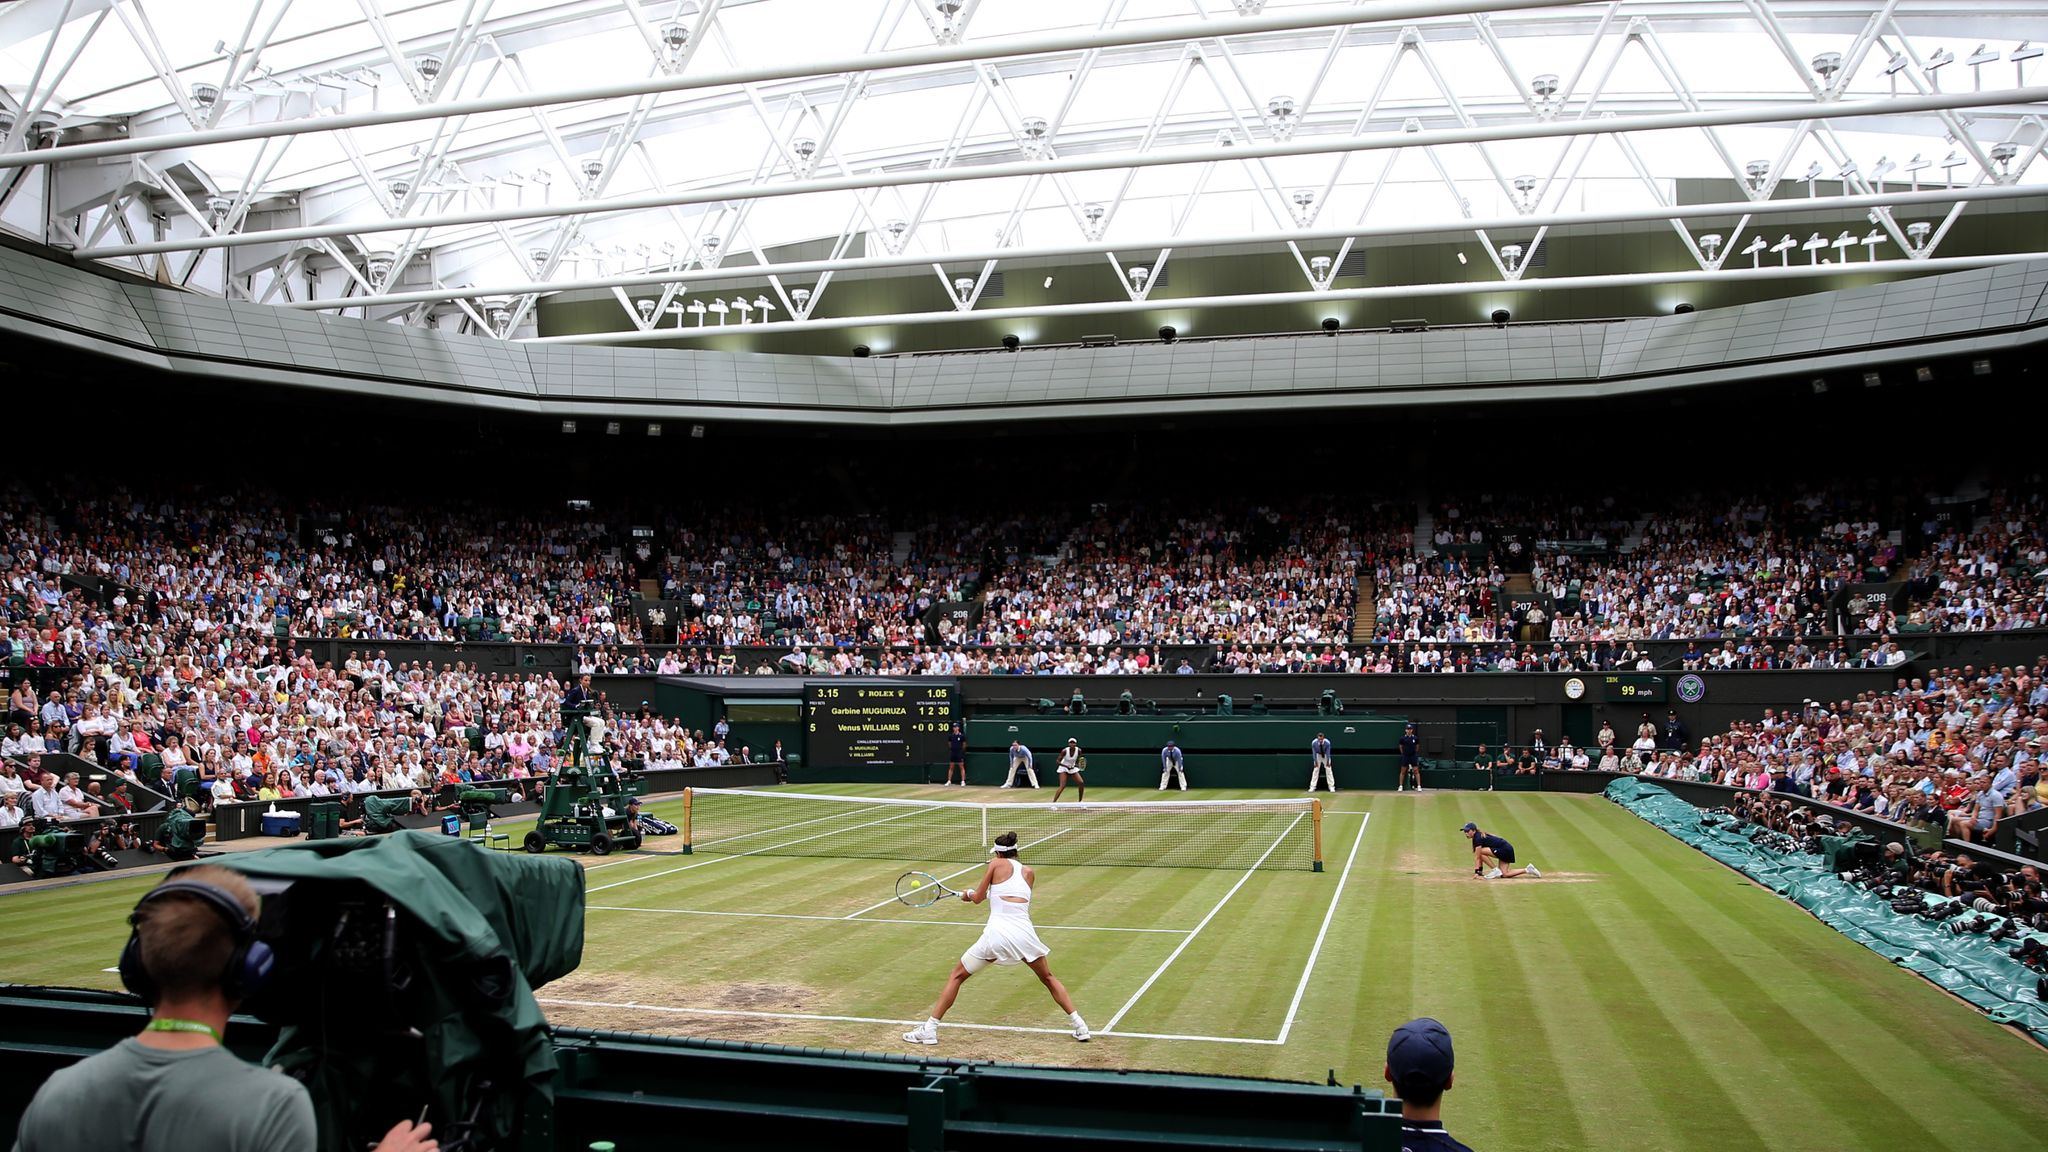 Wimbledon 2022 will see the introduction of play on Middle Sunday and the famous queue returns Tennis News Sky Sports